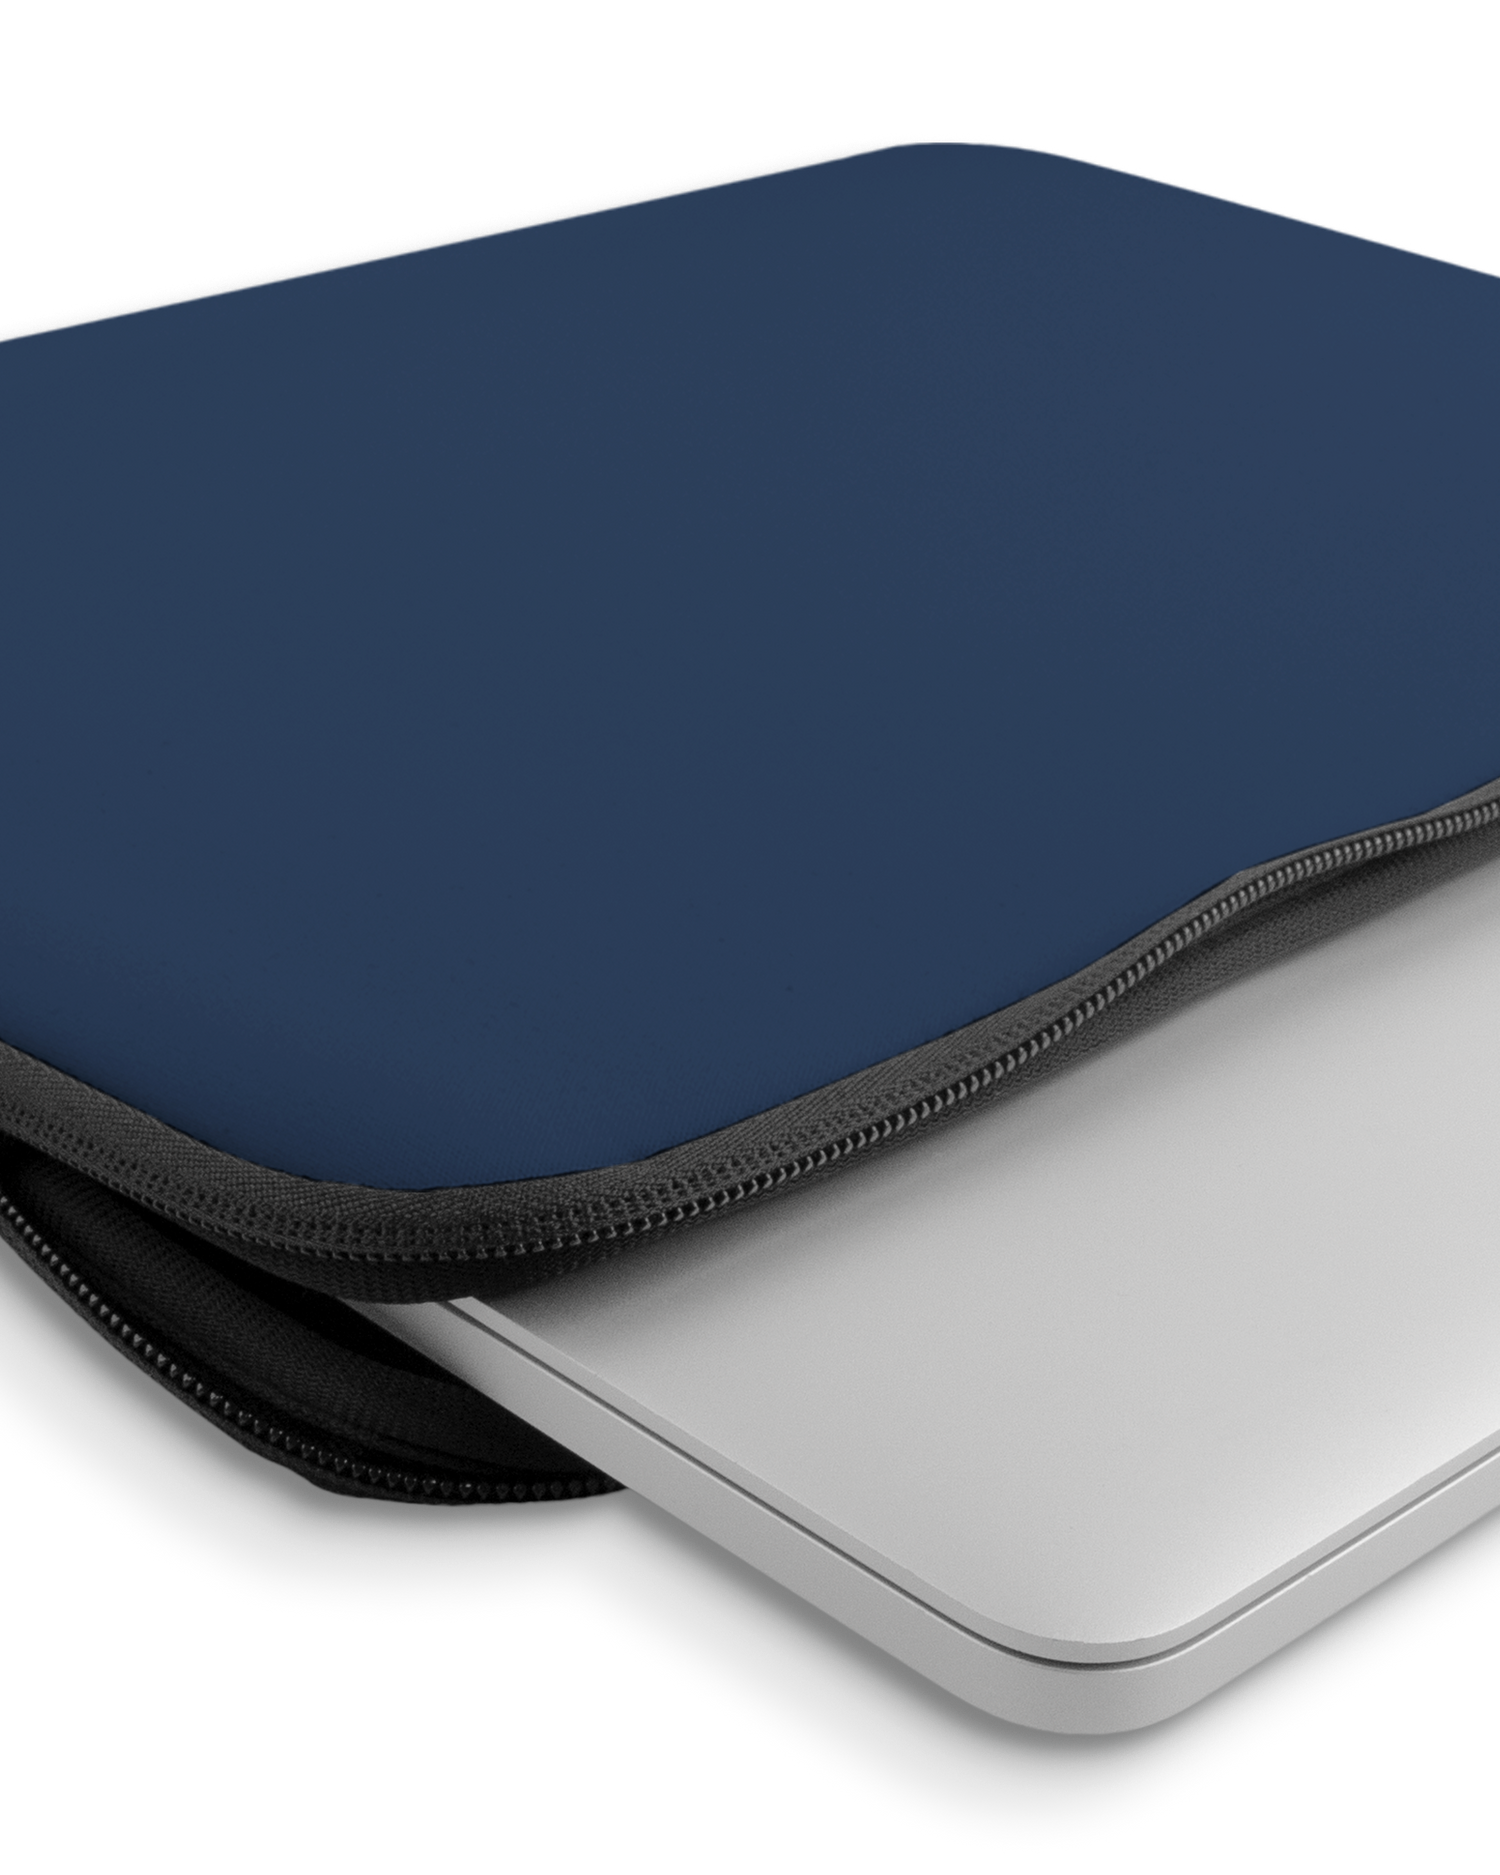 NAVY Laptop Case 14-15 inch with device inside